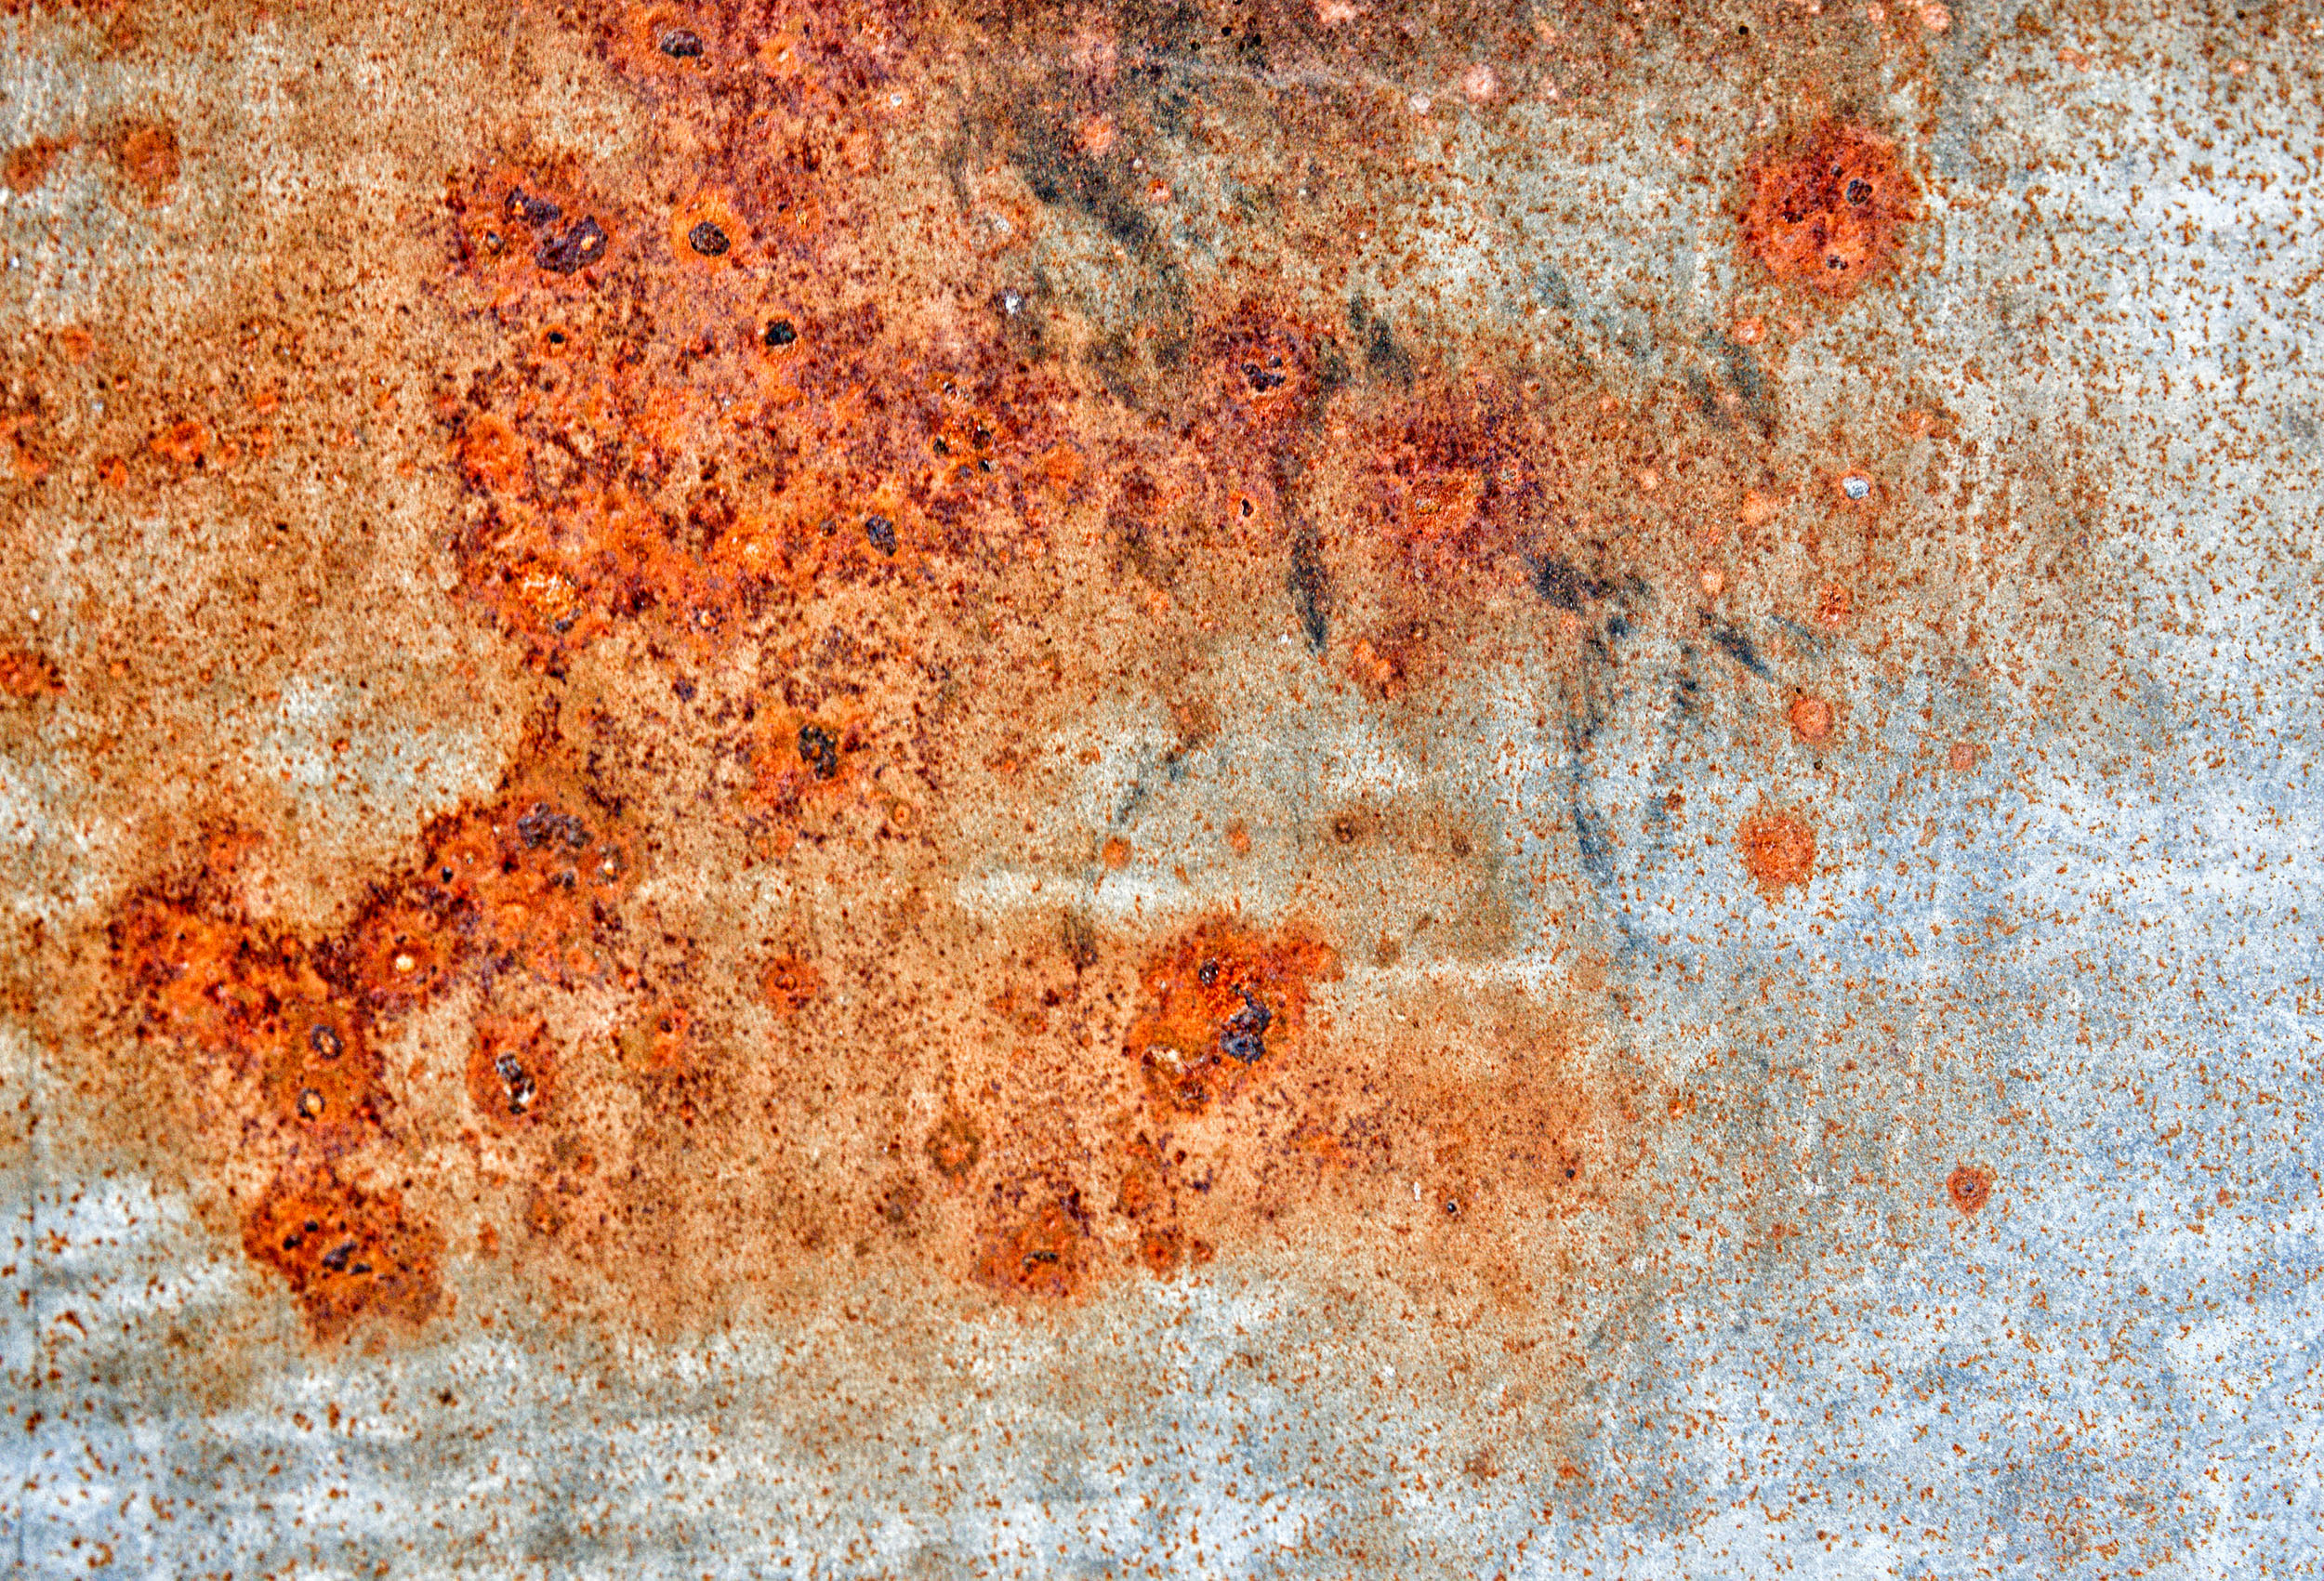 Rusty Backgrounds